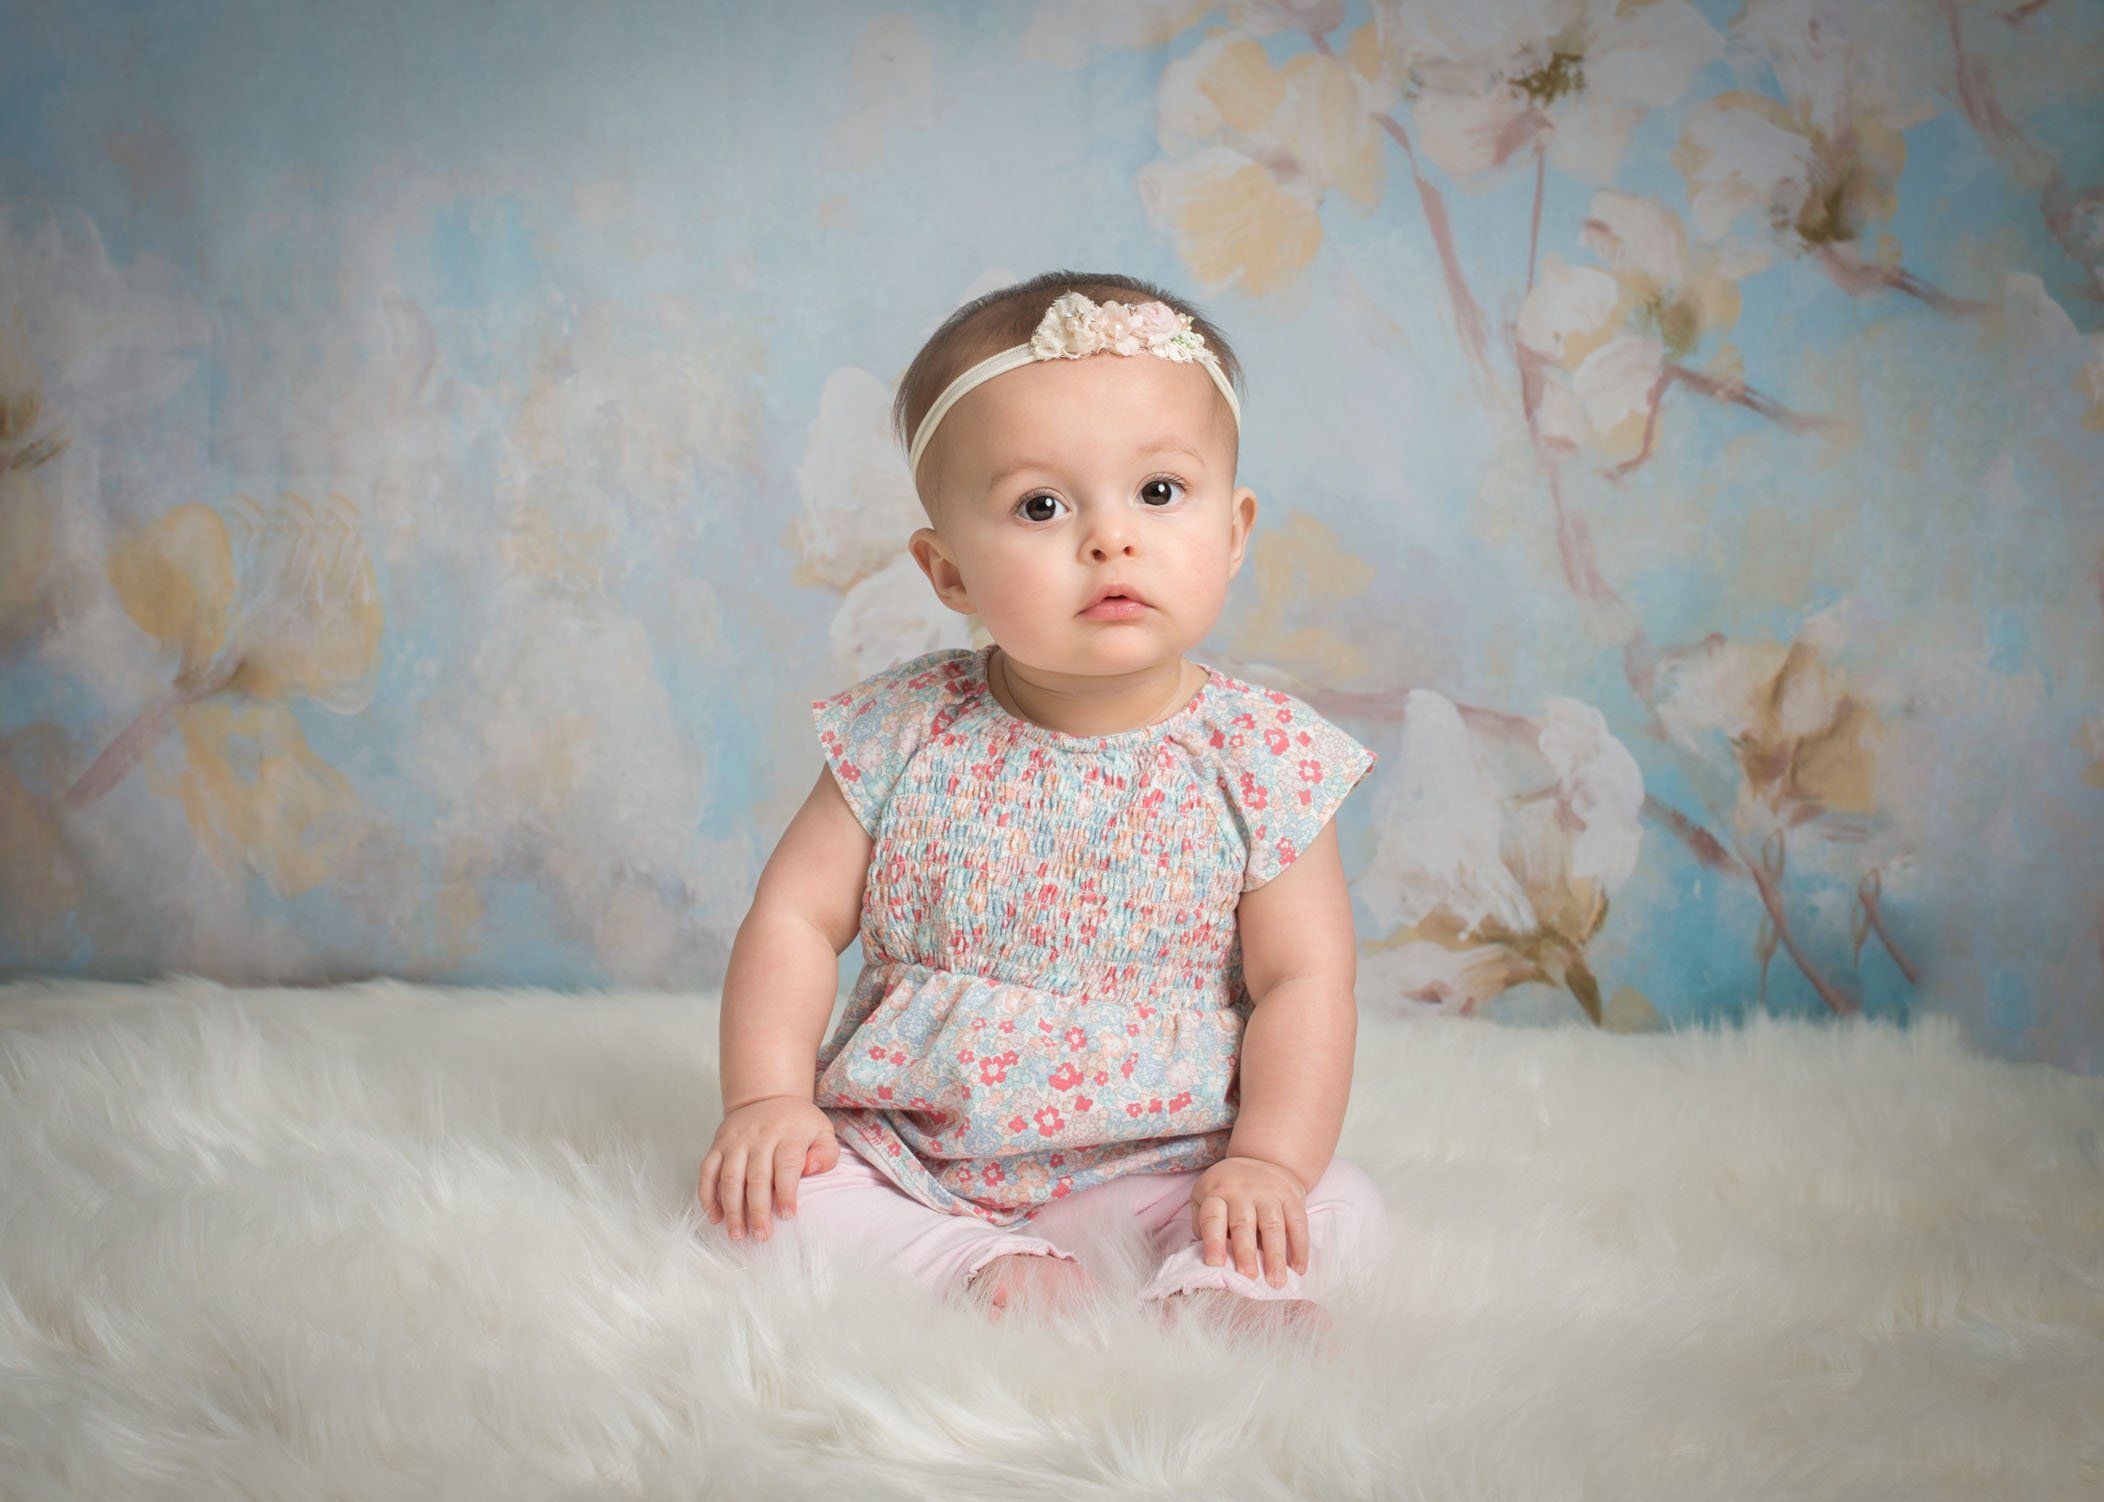 6 month old baby girl looking serious sitting on white fur in front of blue floral backdrop